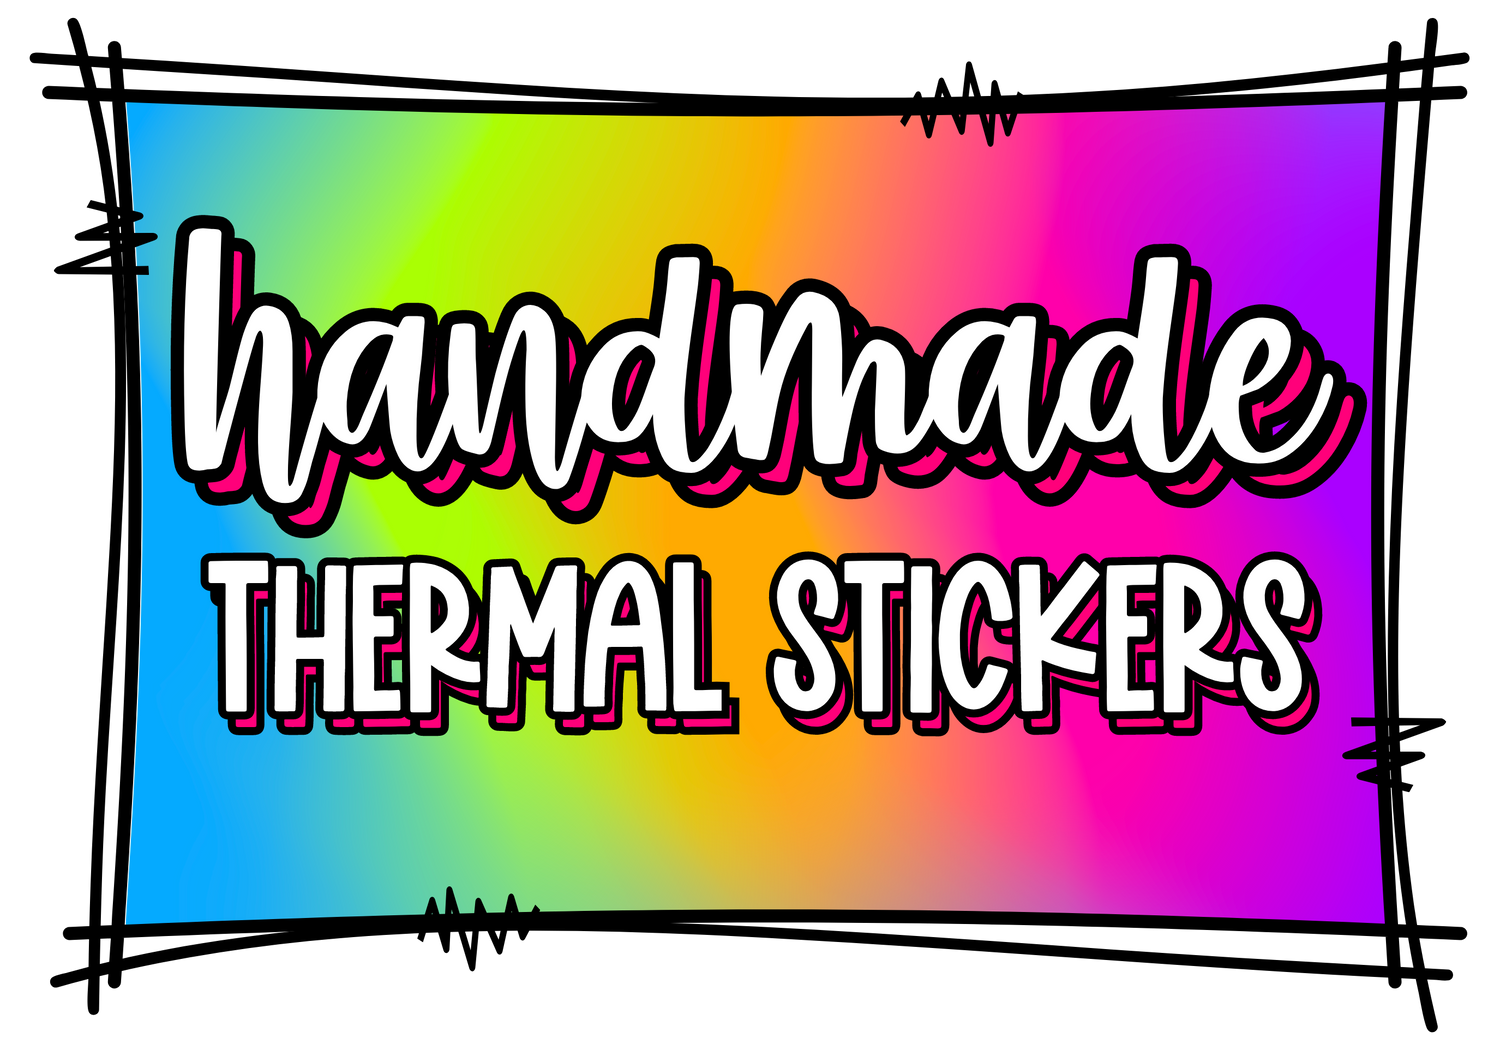 Handmade Small Business Thermal Stickers